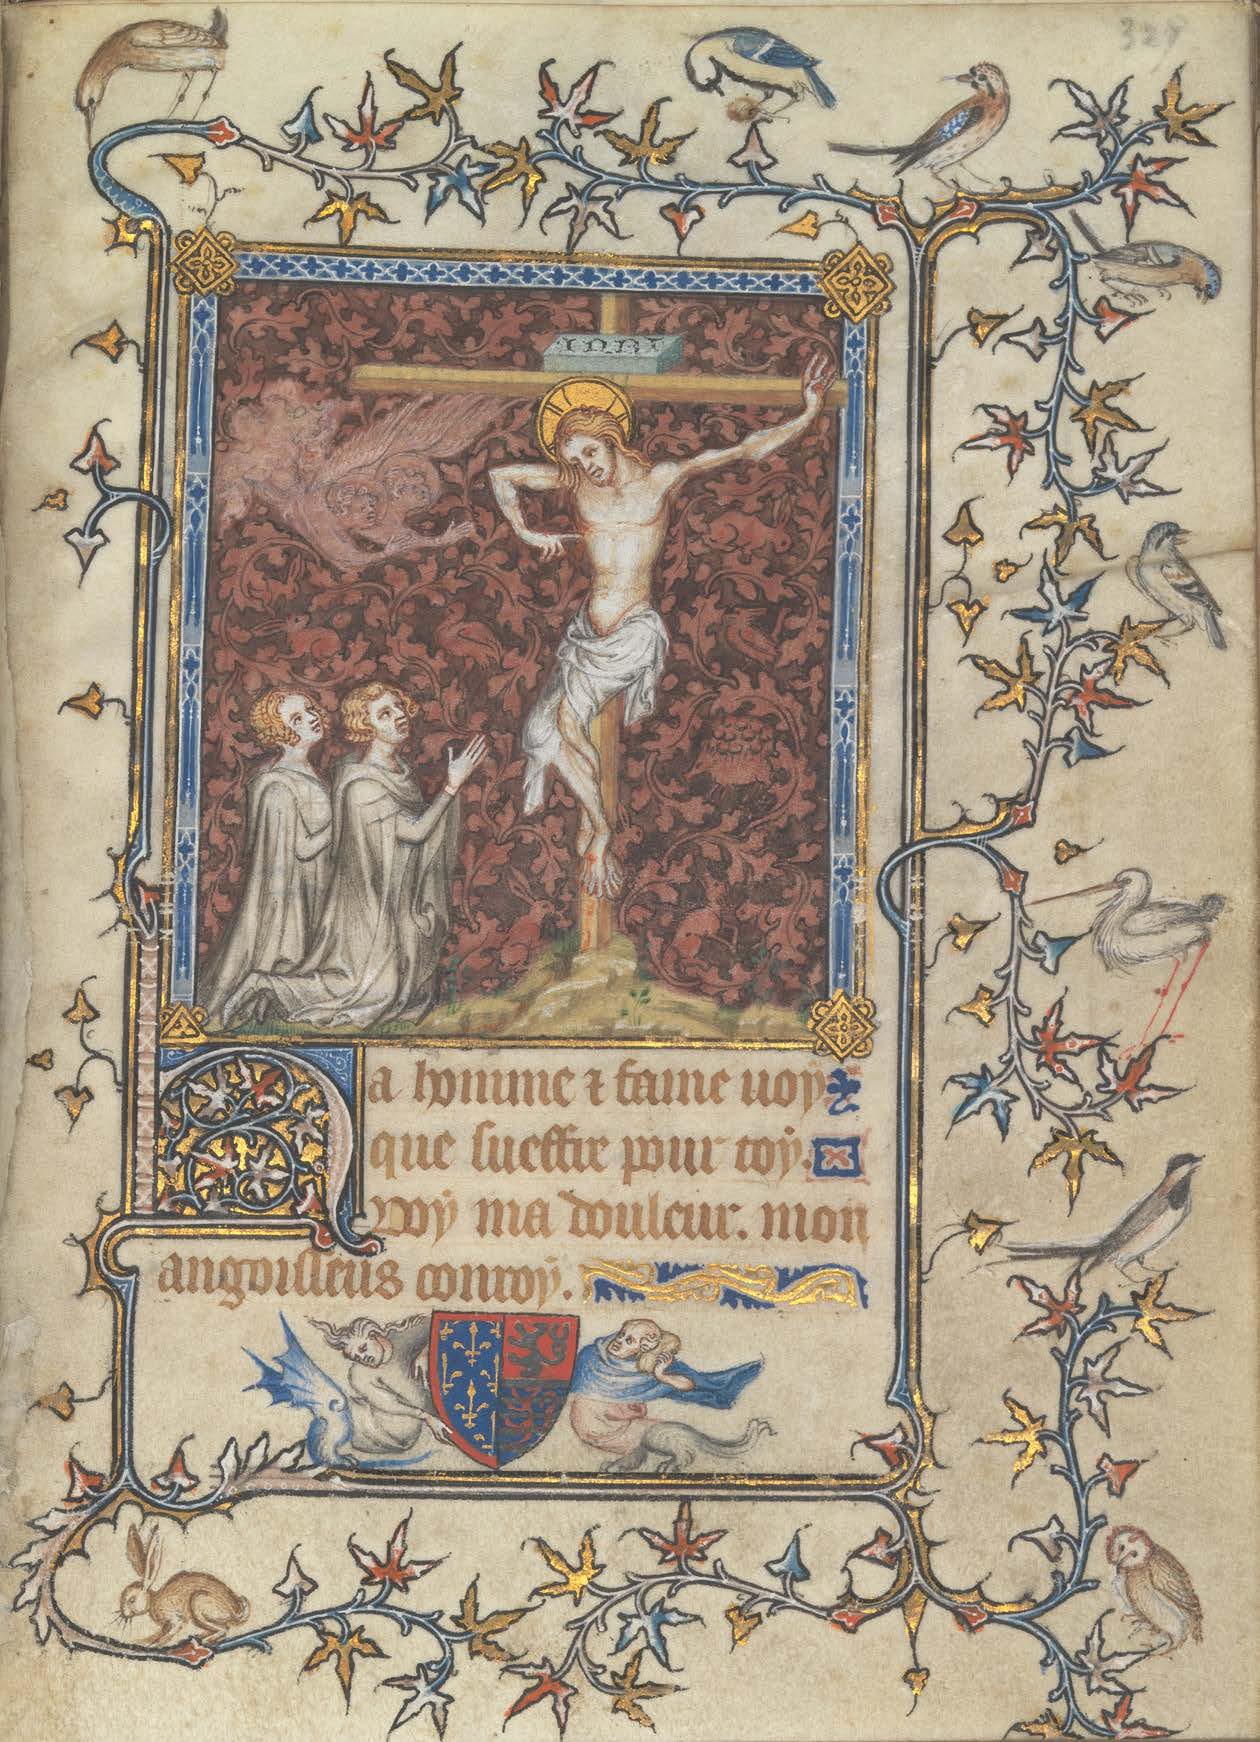 “Look unto me in every thought; doubt not, fear not. Behold the wounds which pierced my side, and also the prints of the nails in my hands and feet” (Doctrine and Covenants 6:36–37). The Prayer Book of Bonne of Luxembourg, Duchess of Normandy, fol. 328r, before 1349. The Metropolitan Museum of Art, New York, The Cloisters Collection, 1969.